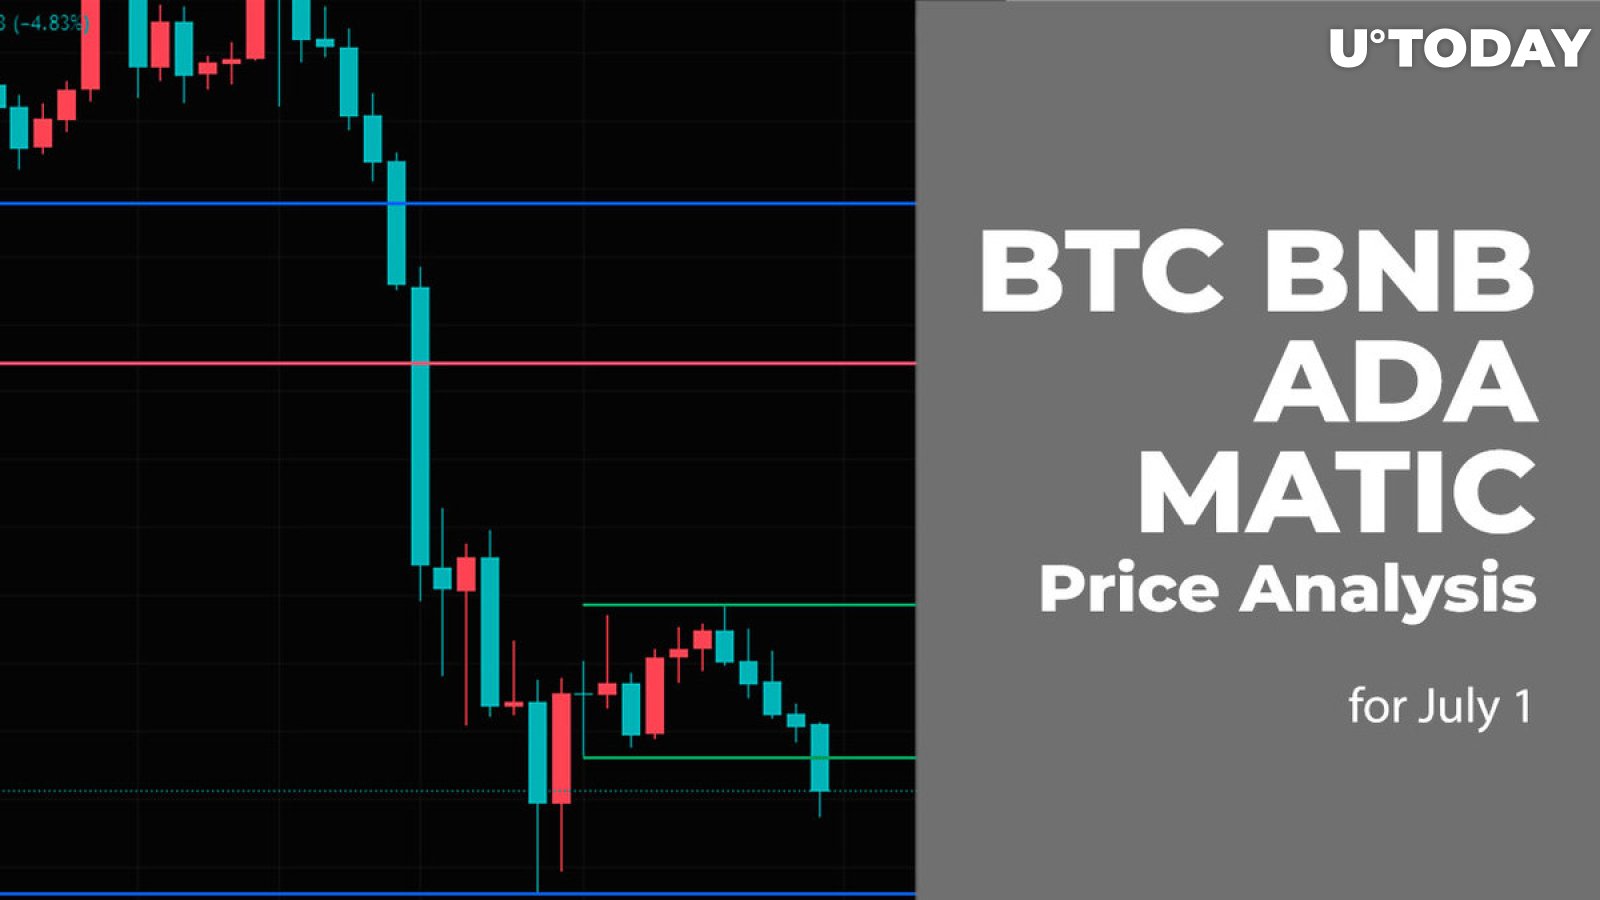 BTC, BNB, ADA and MATIC Price Analysis for July 1